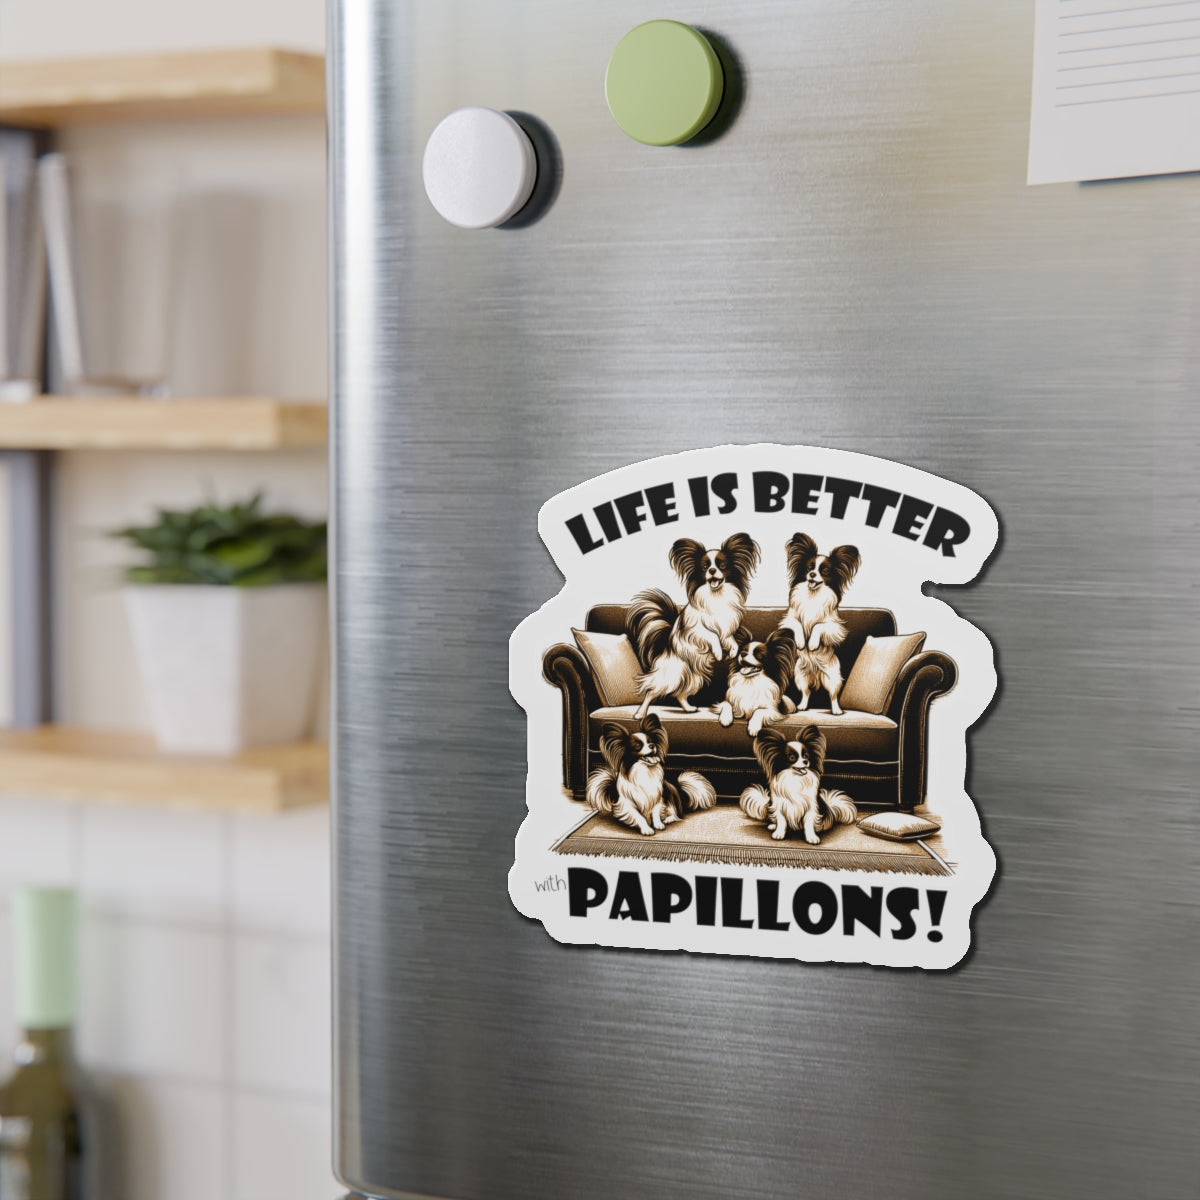 LIFE IS BETTER - Papillons -  Die-Cut Magnets